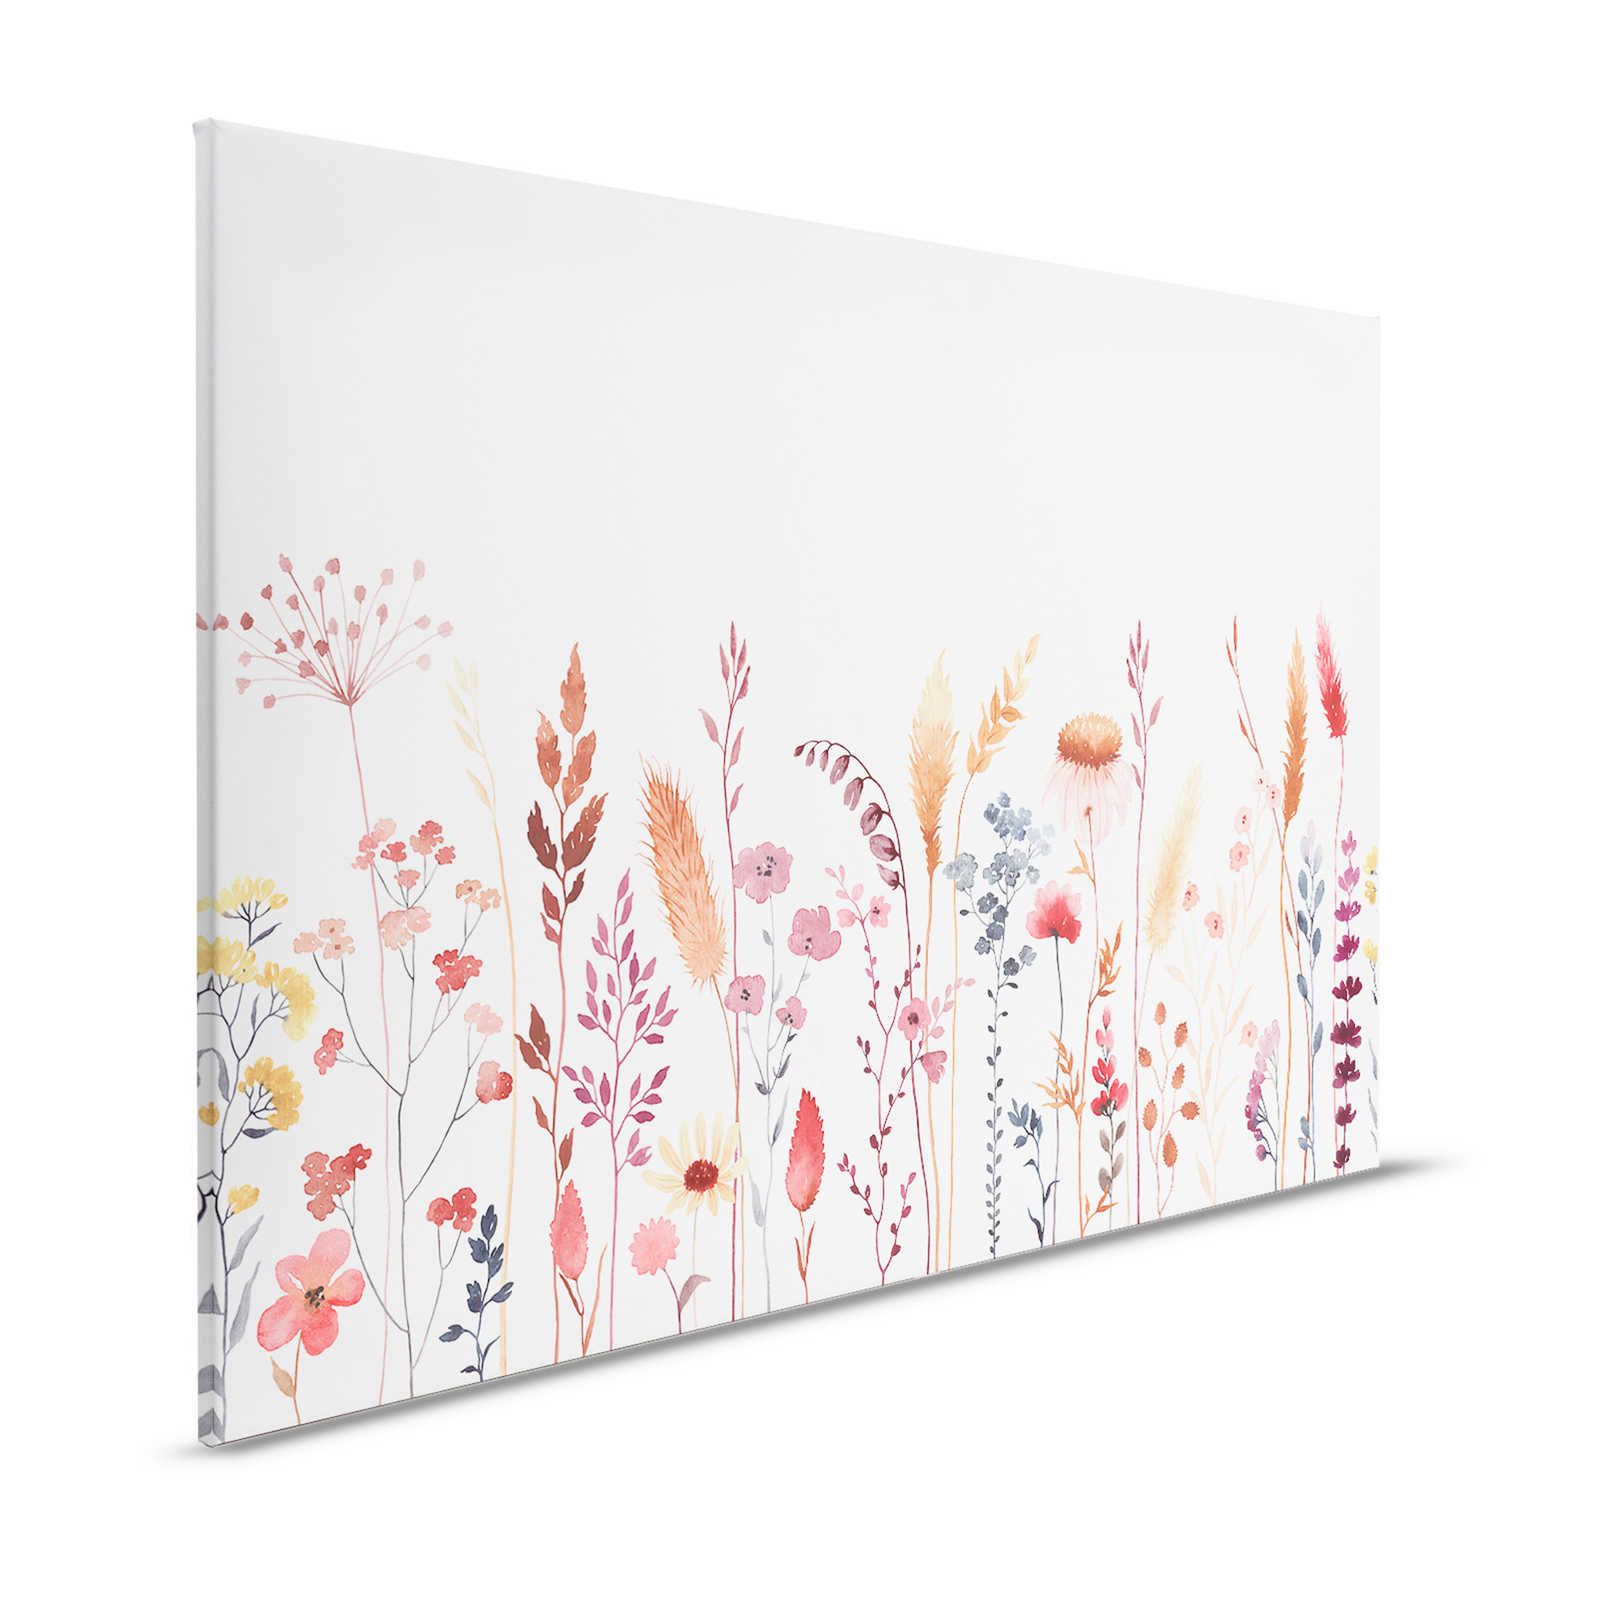 Canvas for children's room with leaves and grasses - 120 cm x 80 cm
